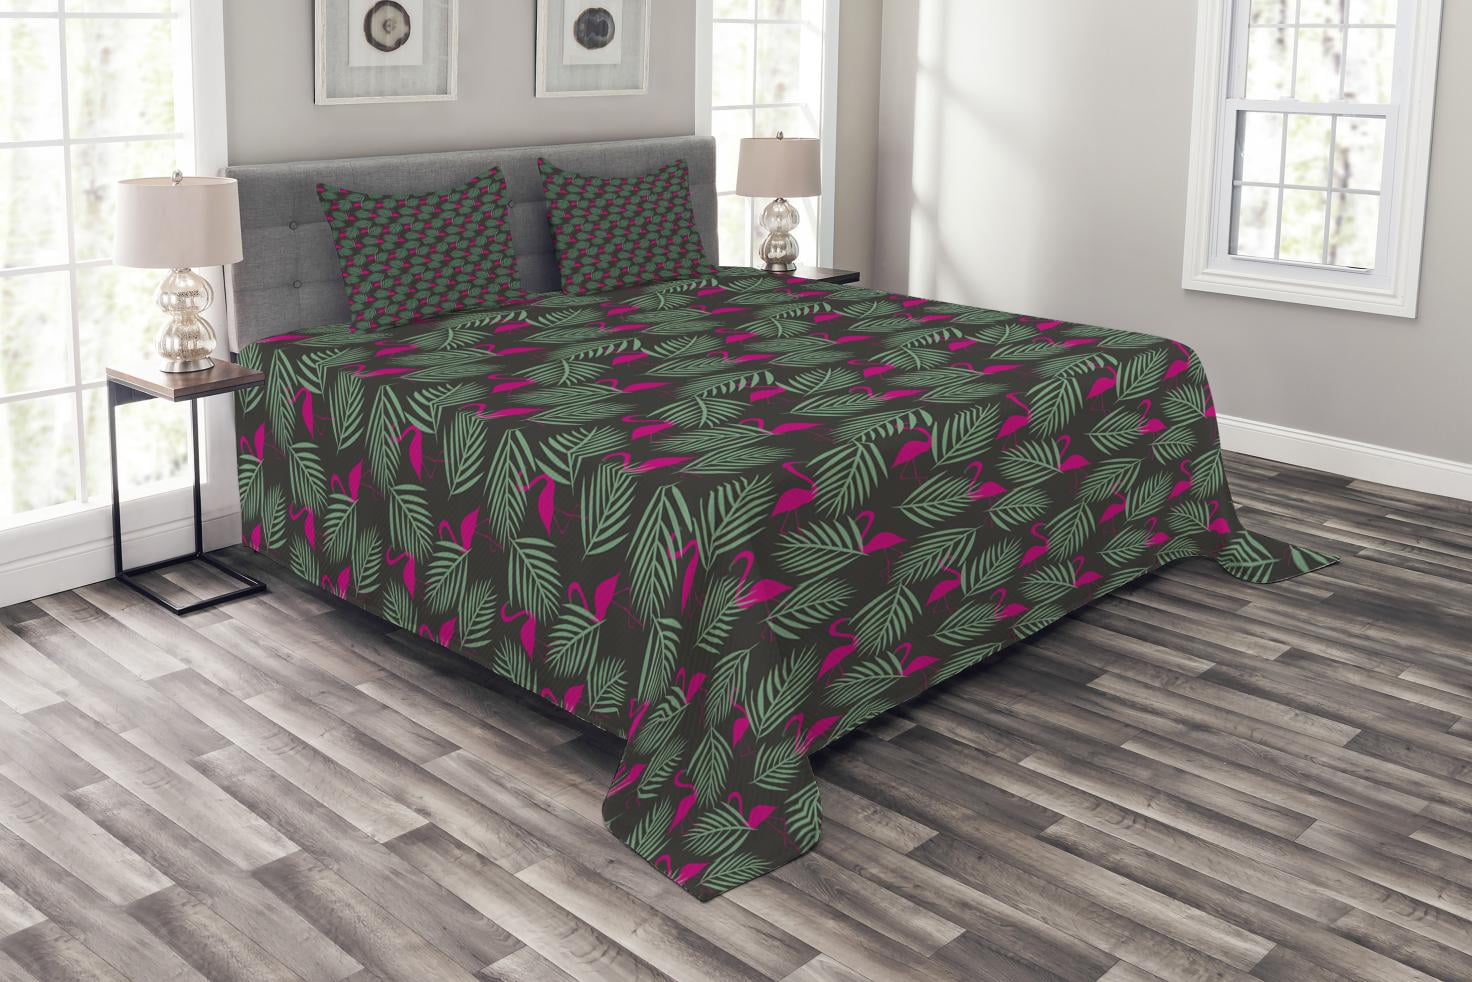 Decorative Quilted 3 Piece Coverlet Set with 2 Pillow Shams Ambesonne Flamingo Bedspread King Size Flamingos Sitting on Macro Tropic Exotic Leaves Graphic in Retro Style Artwork Pink Green 